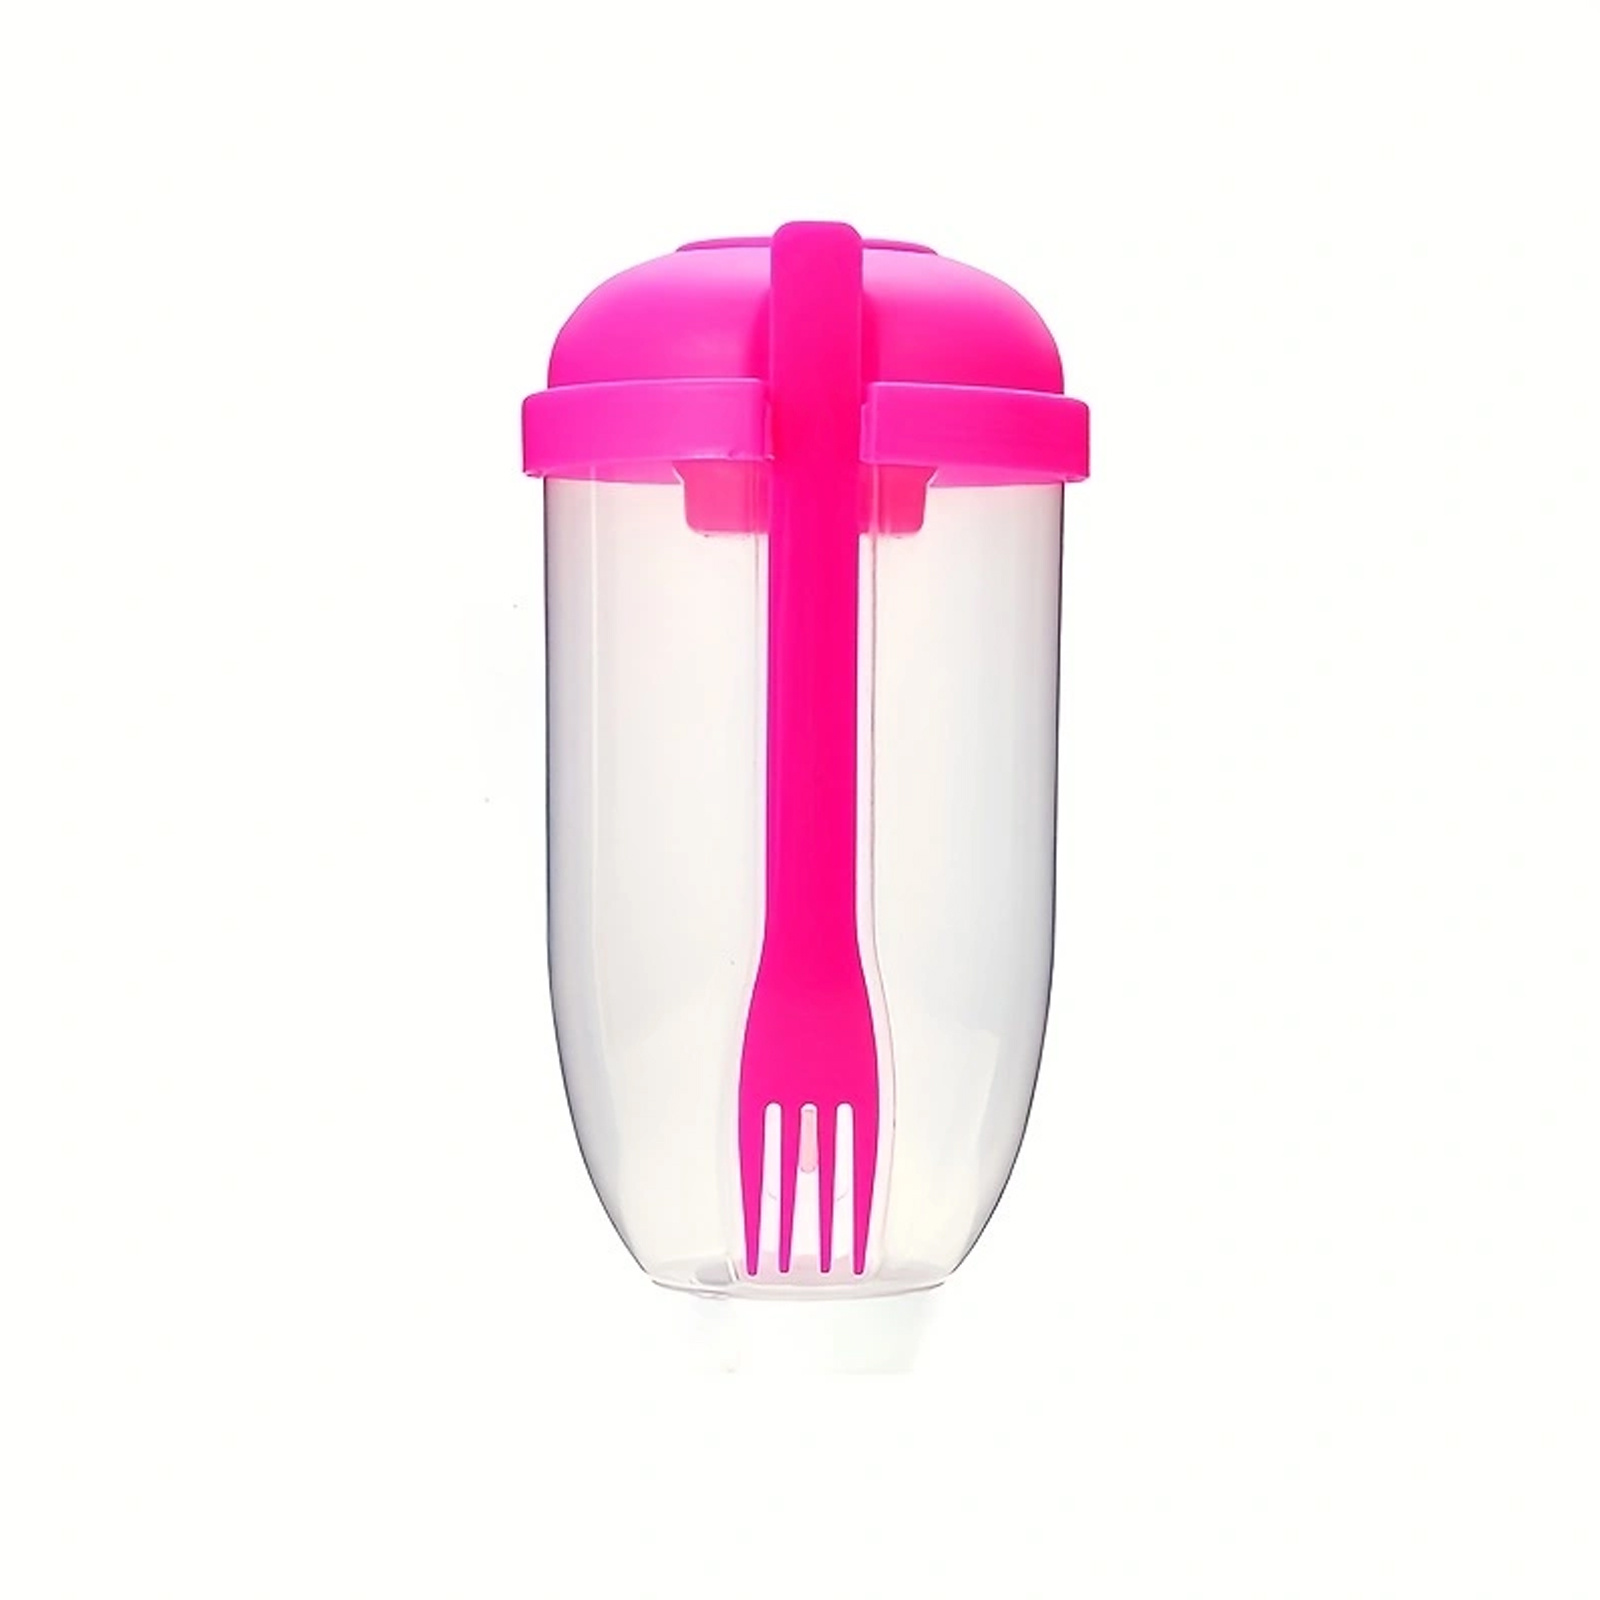  Fresh Salad to Go Container Set, Keep Fit Salad Meal Shaker Cup  with Fork and Salad Dressing Holder, Healthy Salad Container, Vegetable  Breakfast to Take Away Fruit and for Lunch (Pink)